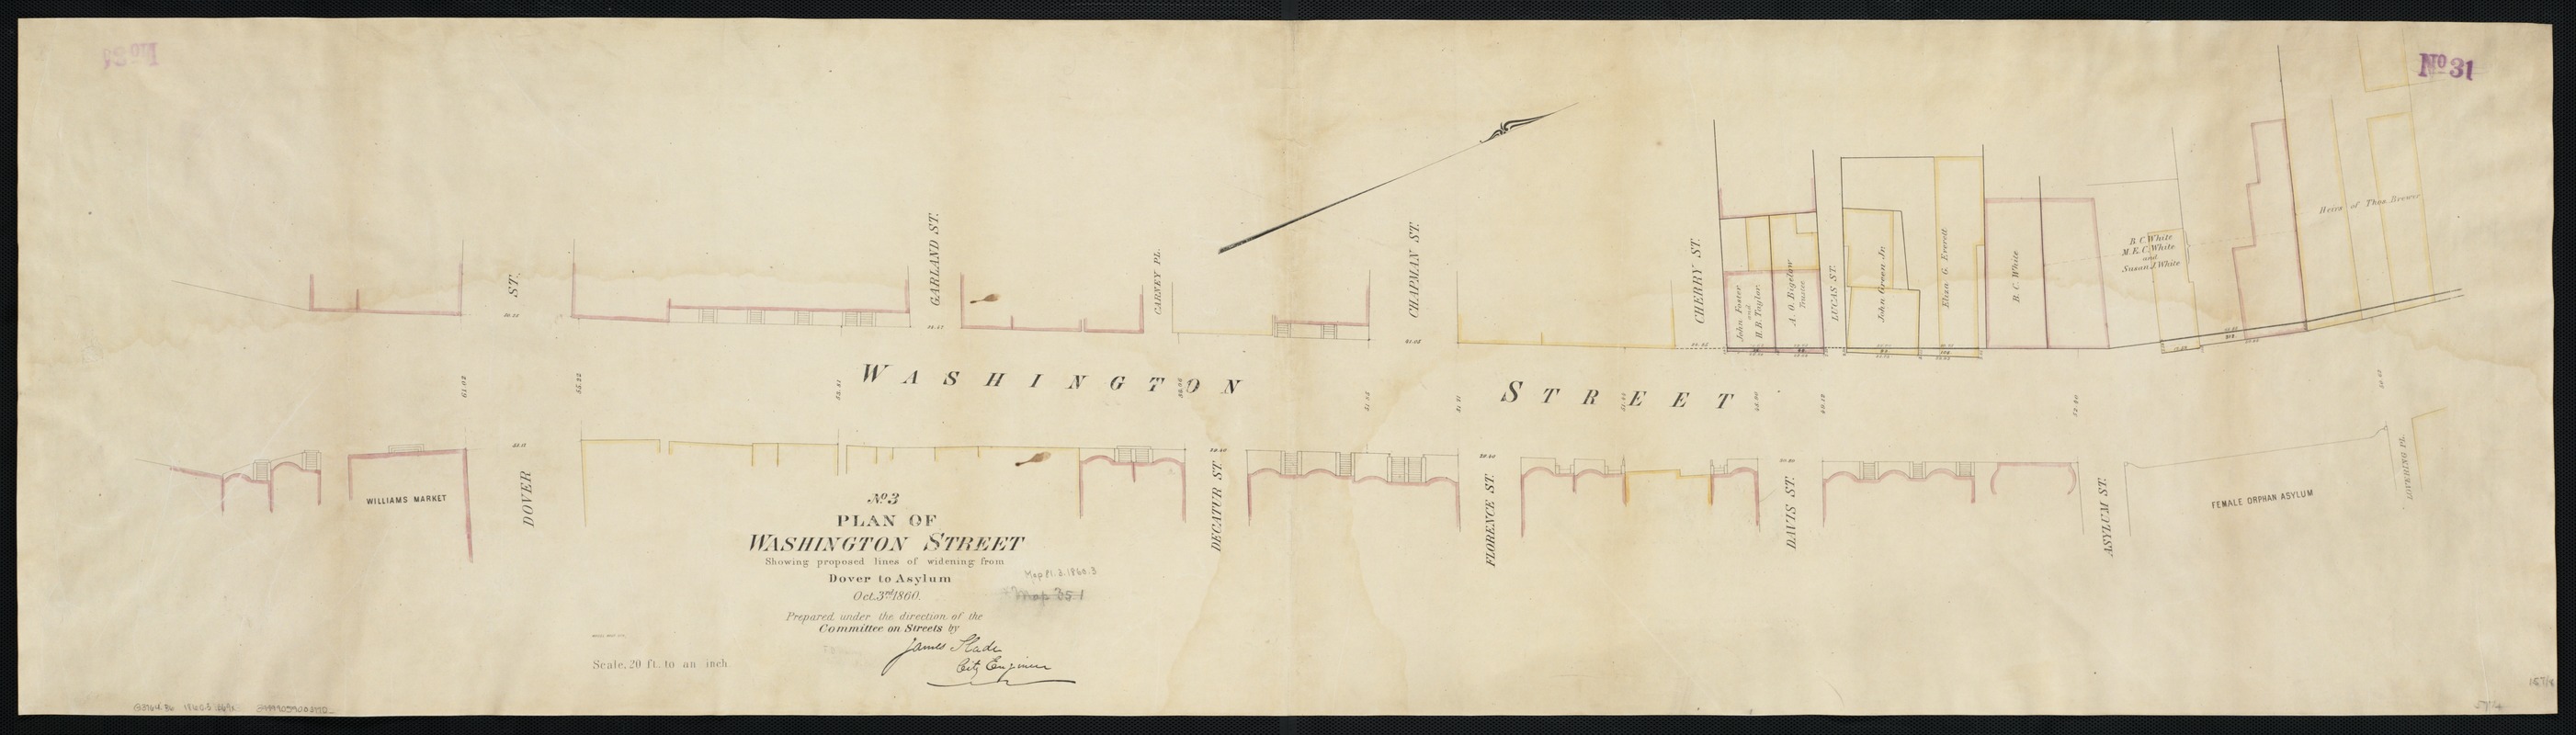 Plan of Washington Street showing proposed lines of widening from Dover to Asylum